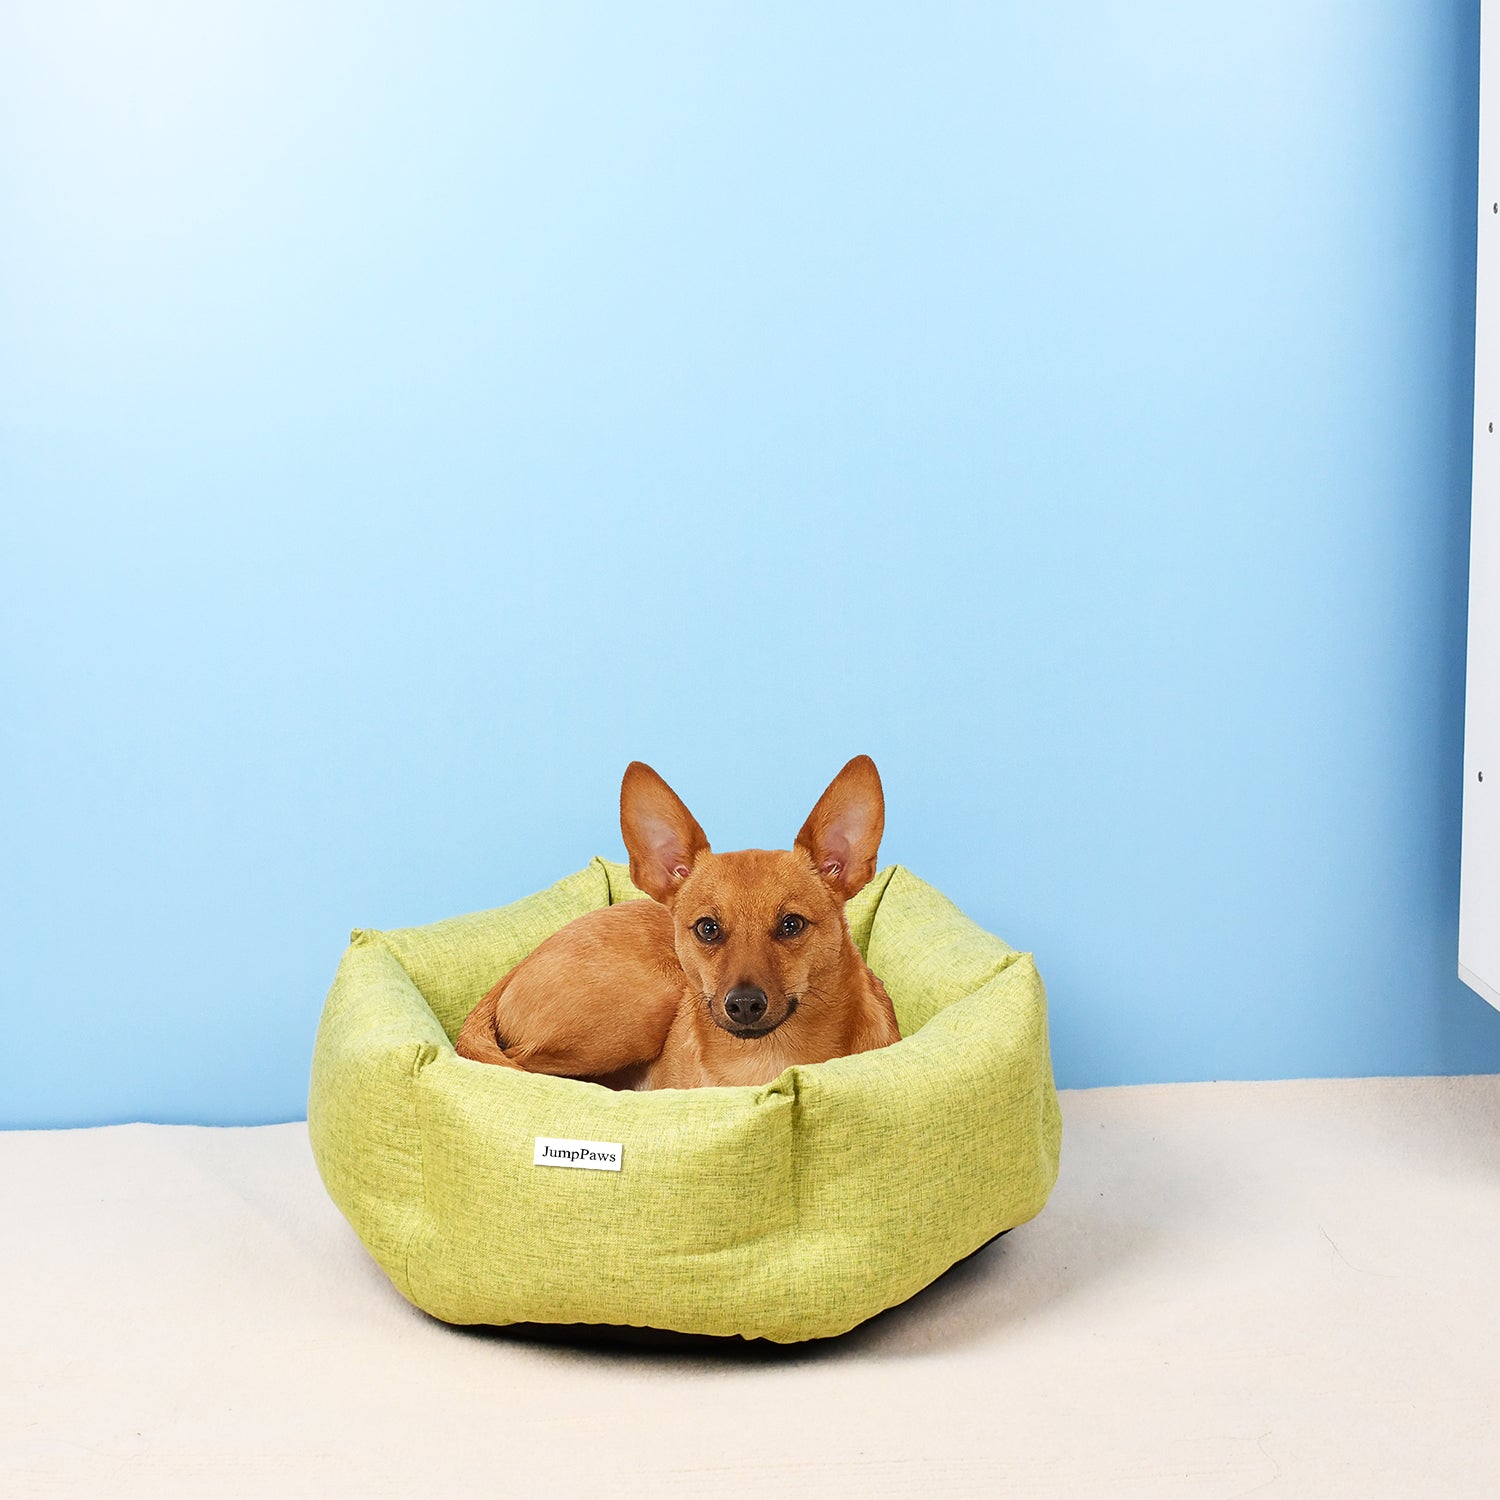 JumpPaws Durable Household Dog Bed, Comfortable Egg-Crate Foam Sofa, Green, 27.6"L x 27.6"W x 7.4"Th